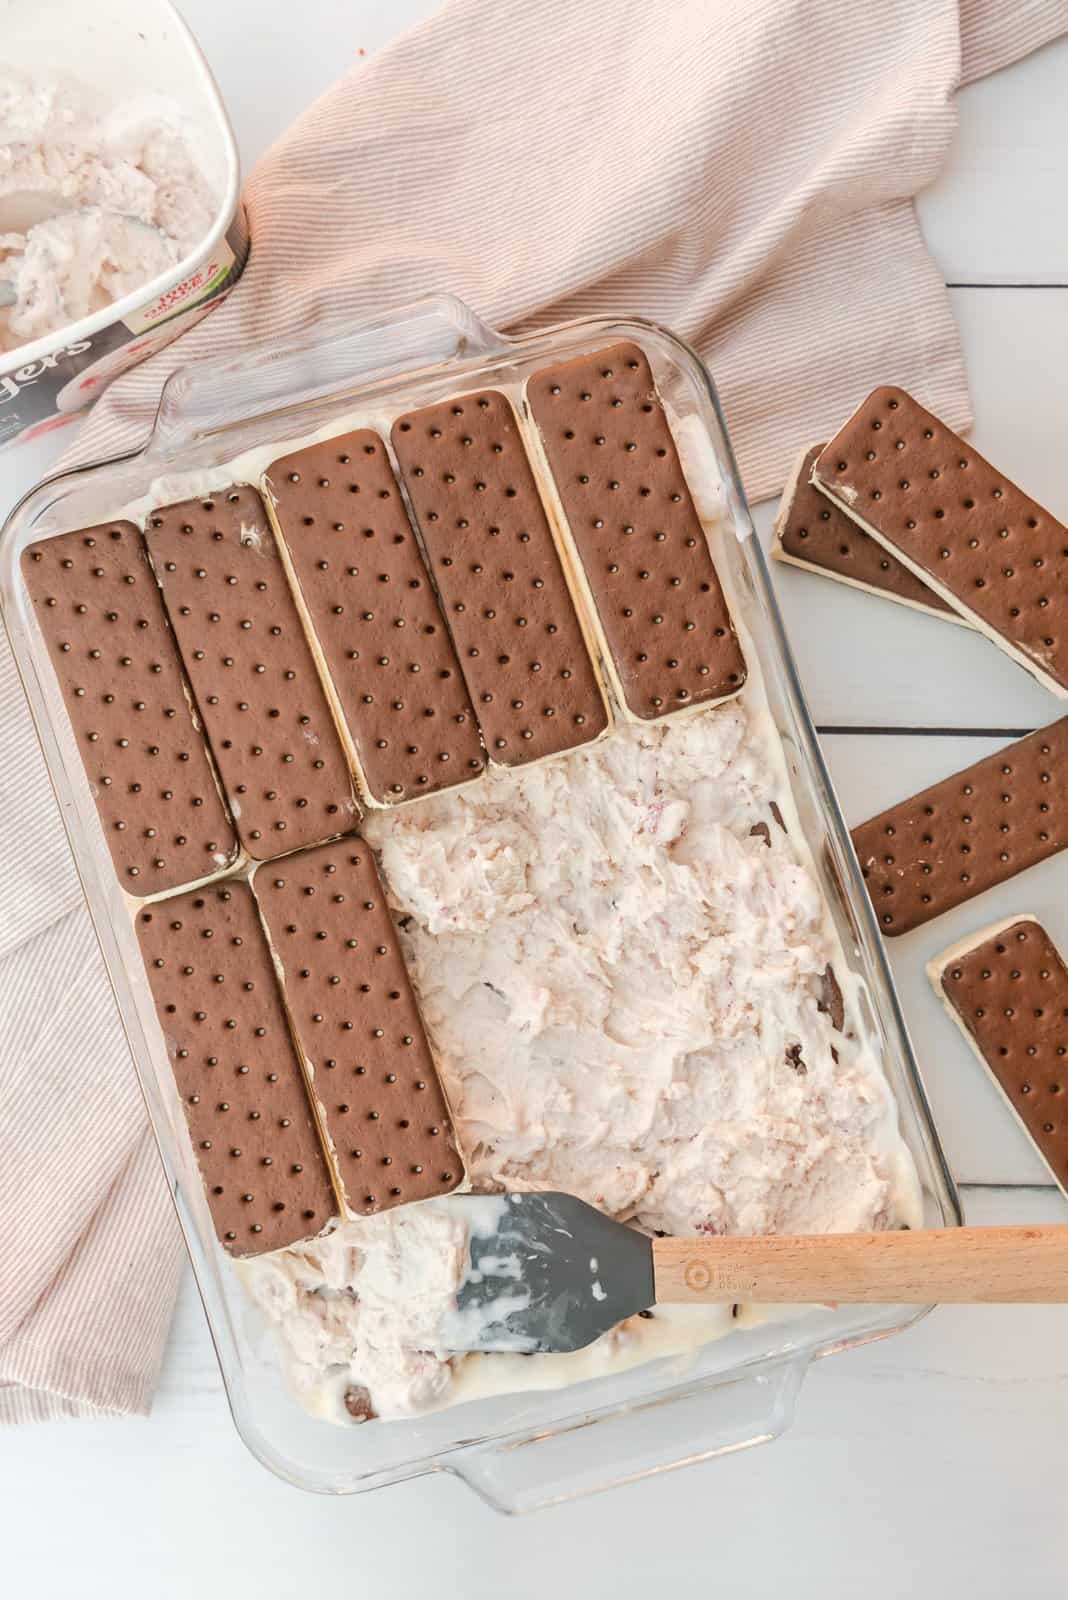 Second layer of ice cream sandwiches added to top of spread out ice cream.